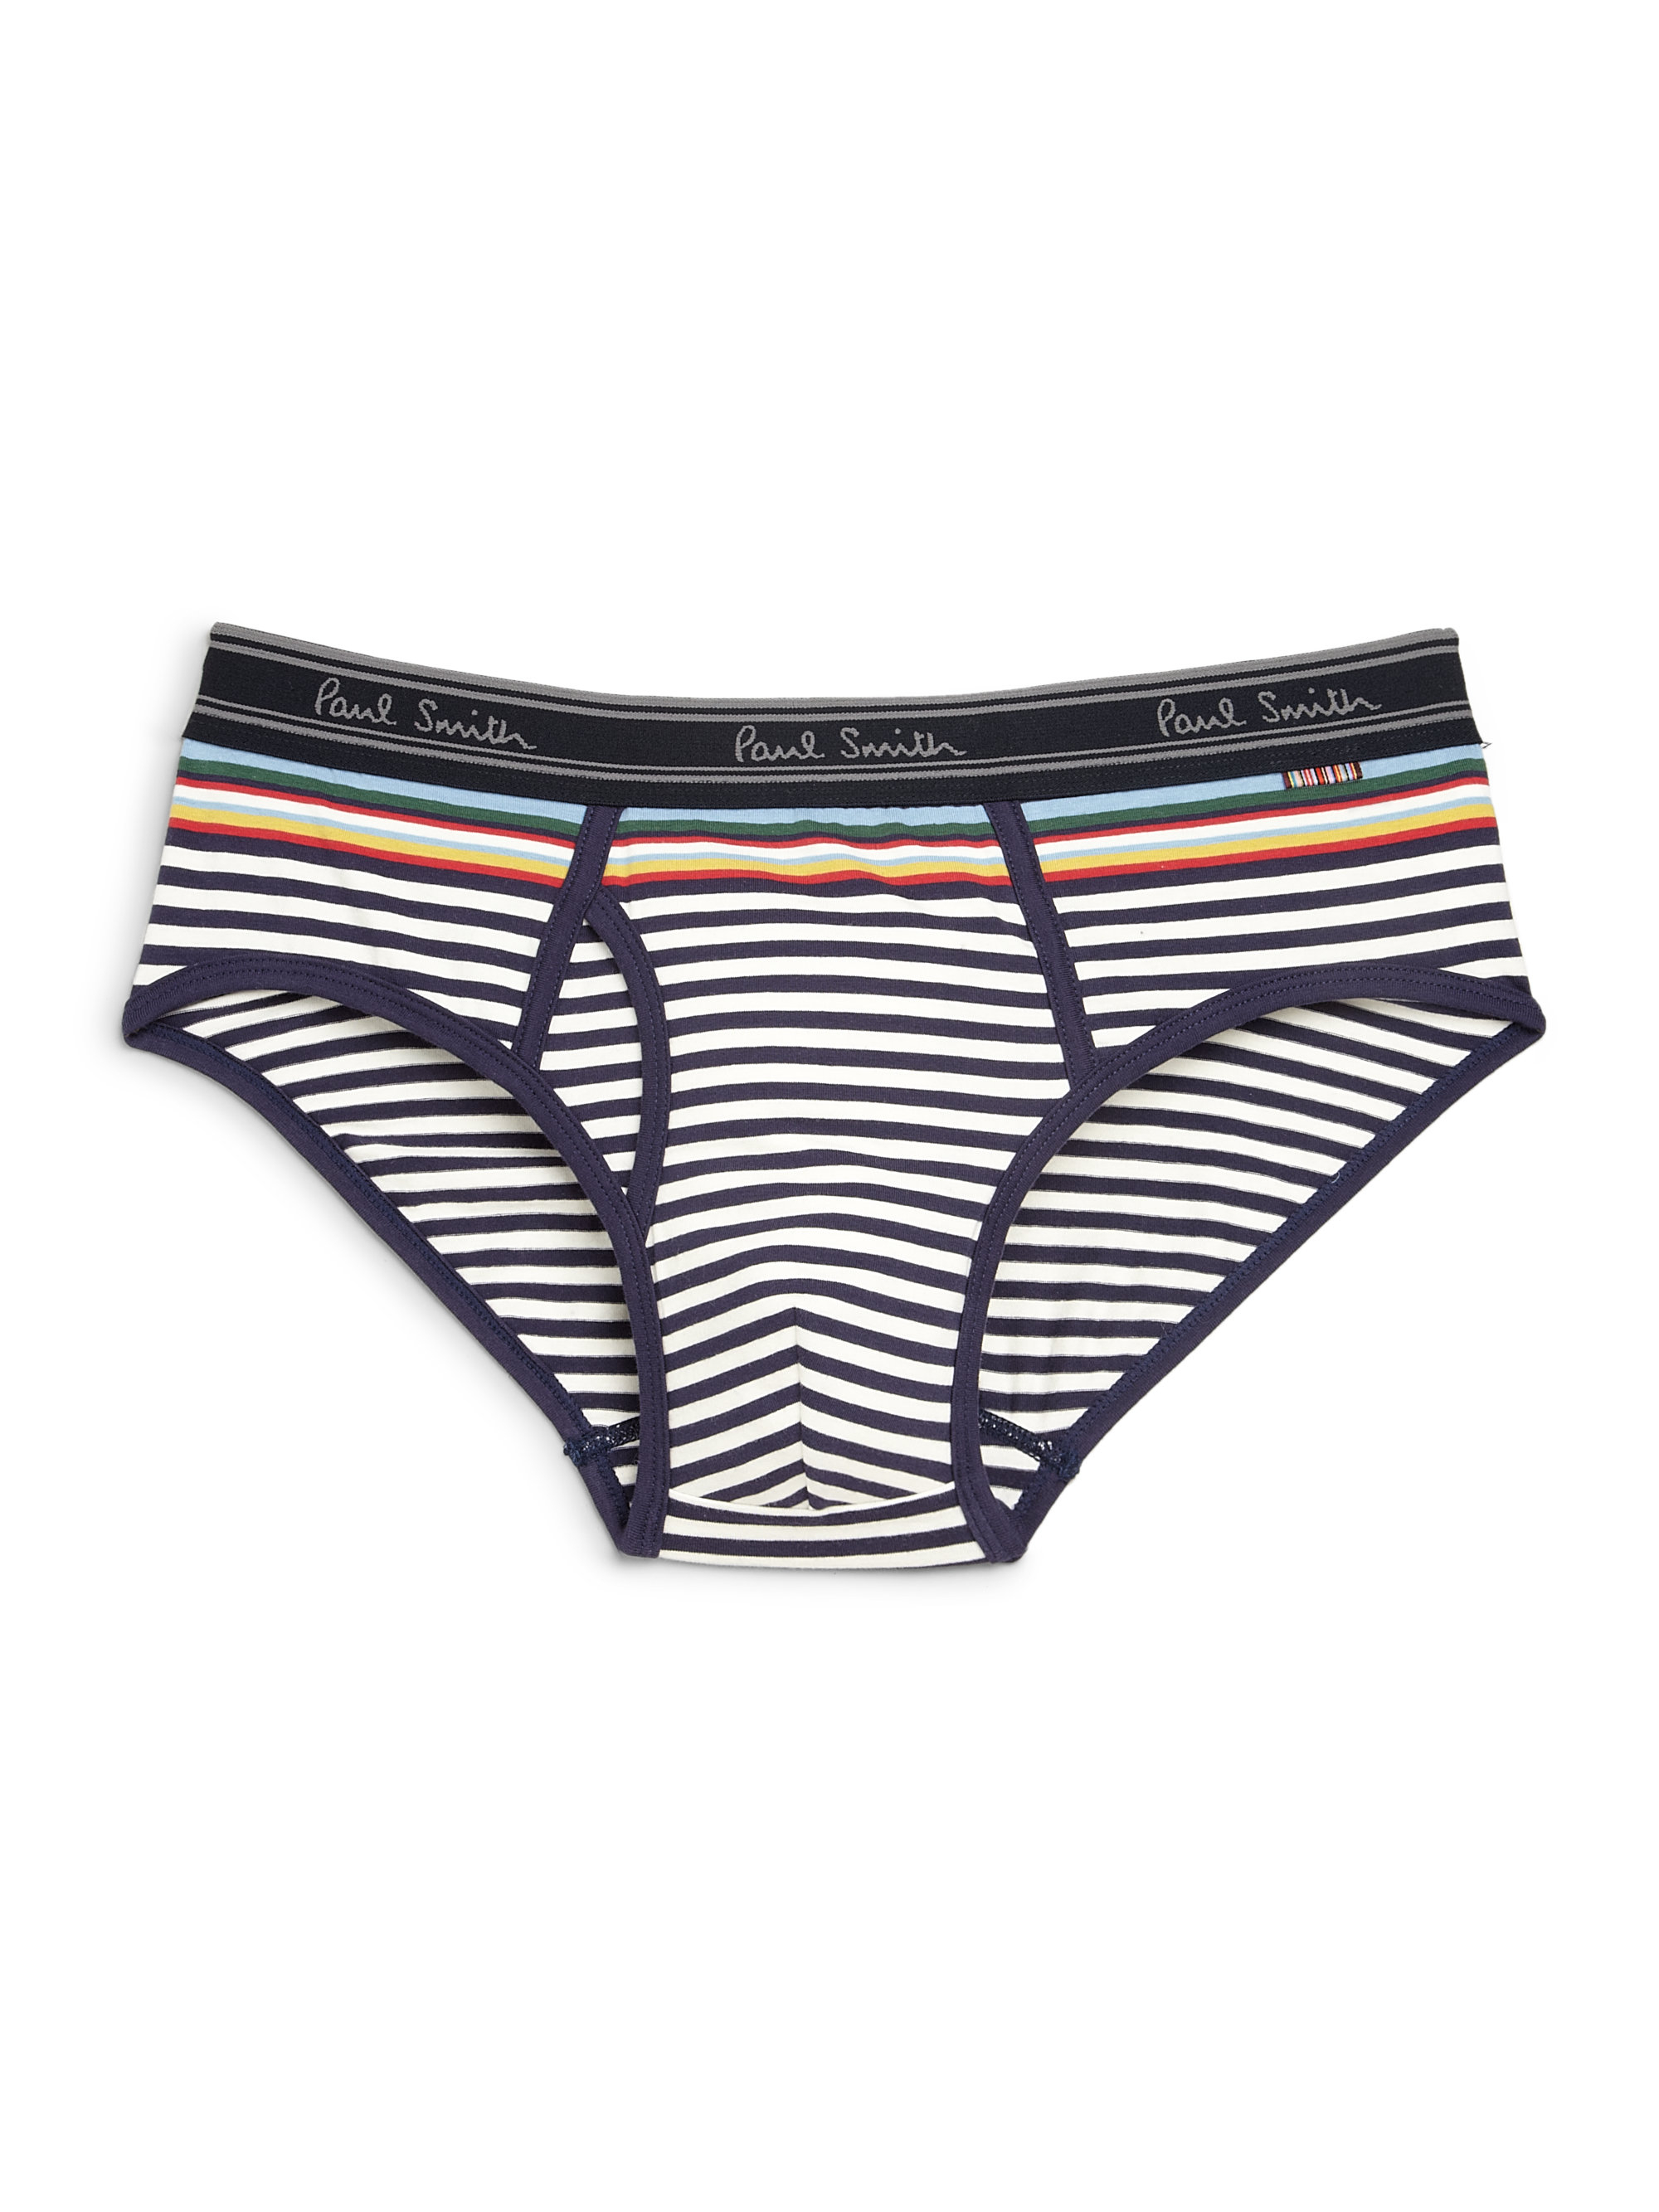 Lyst - Paul Smith Classic Briefs in Blue for Men